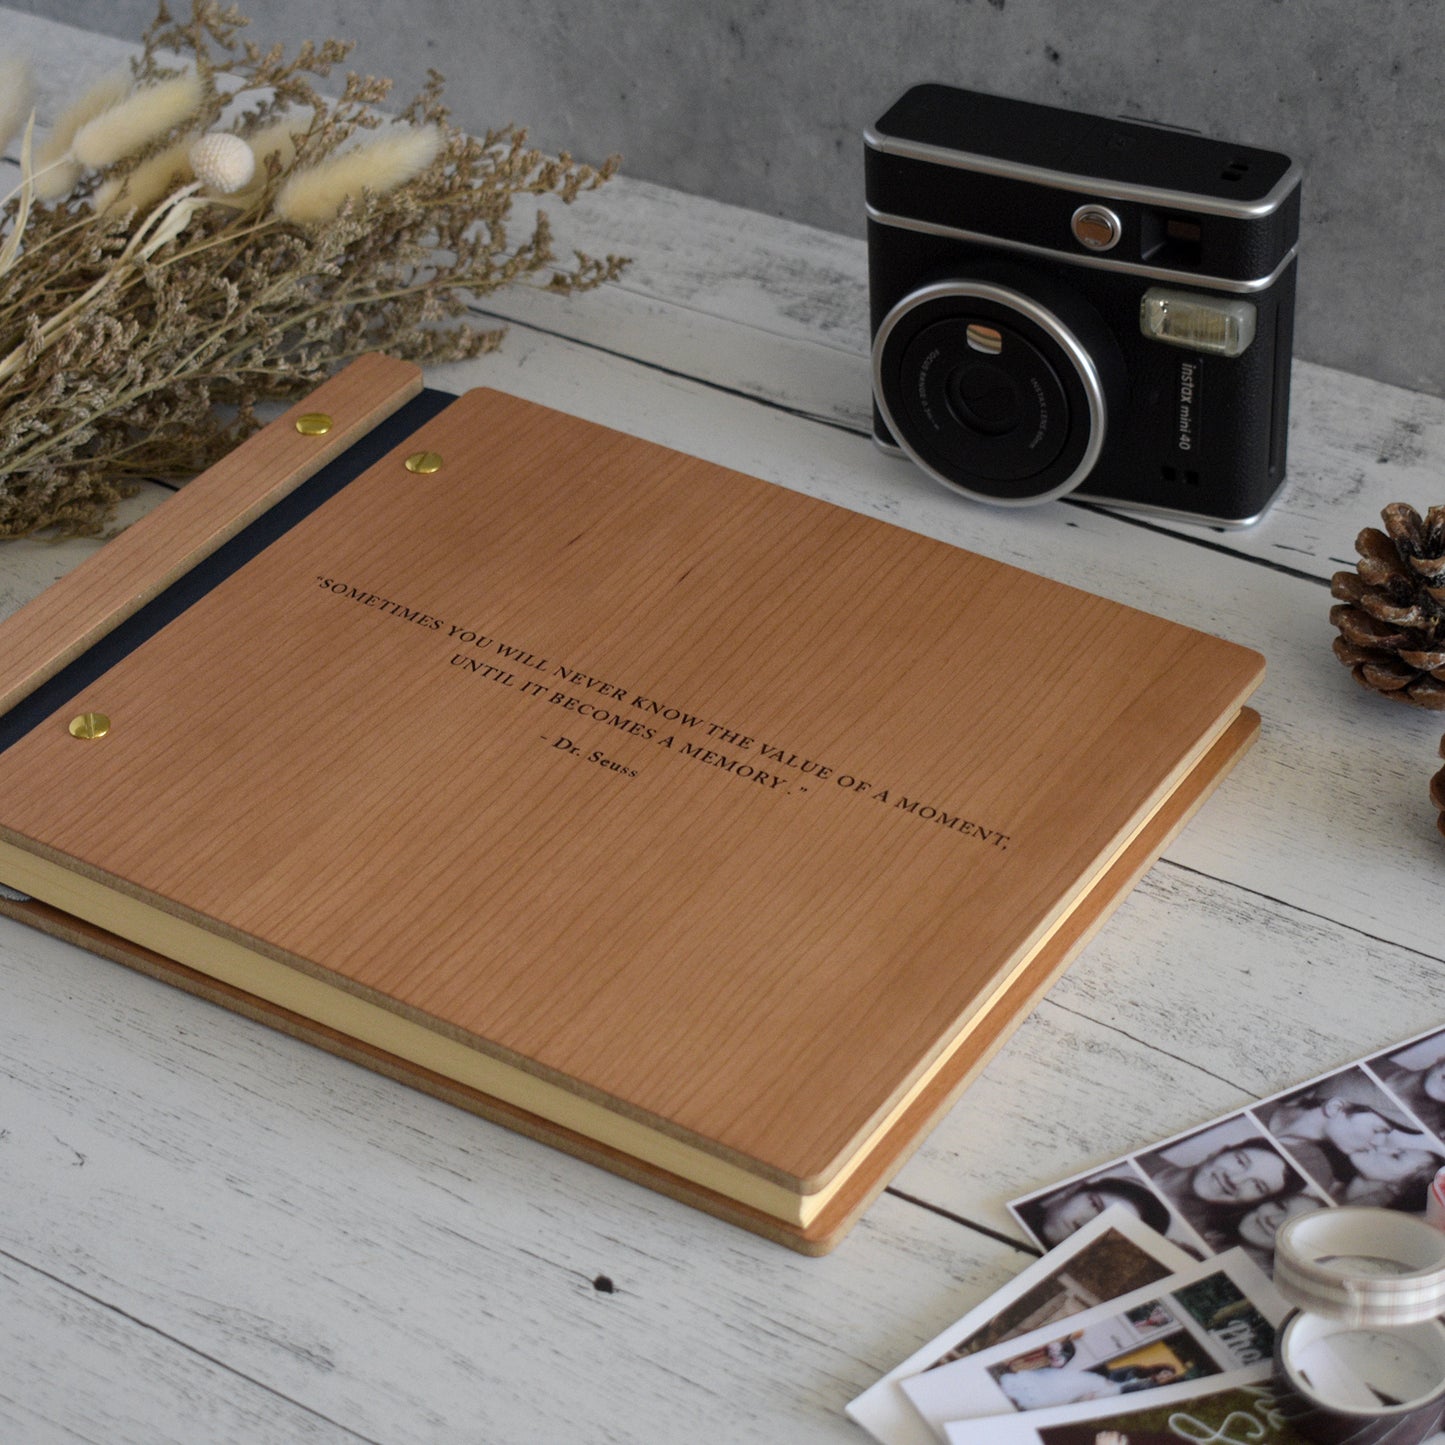 An 8.5x11" guest book lies on a table. Made of cherry wood, navy vegan leather binding, and gold hardware. The front cover includes an engraved design with a personalized quote.